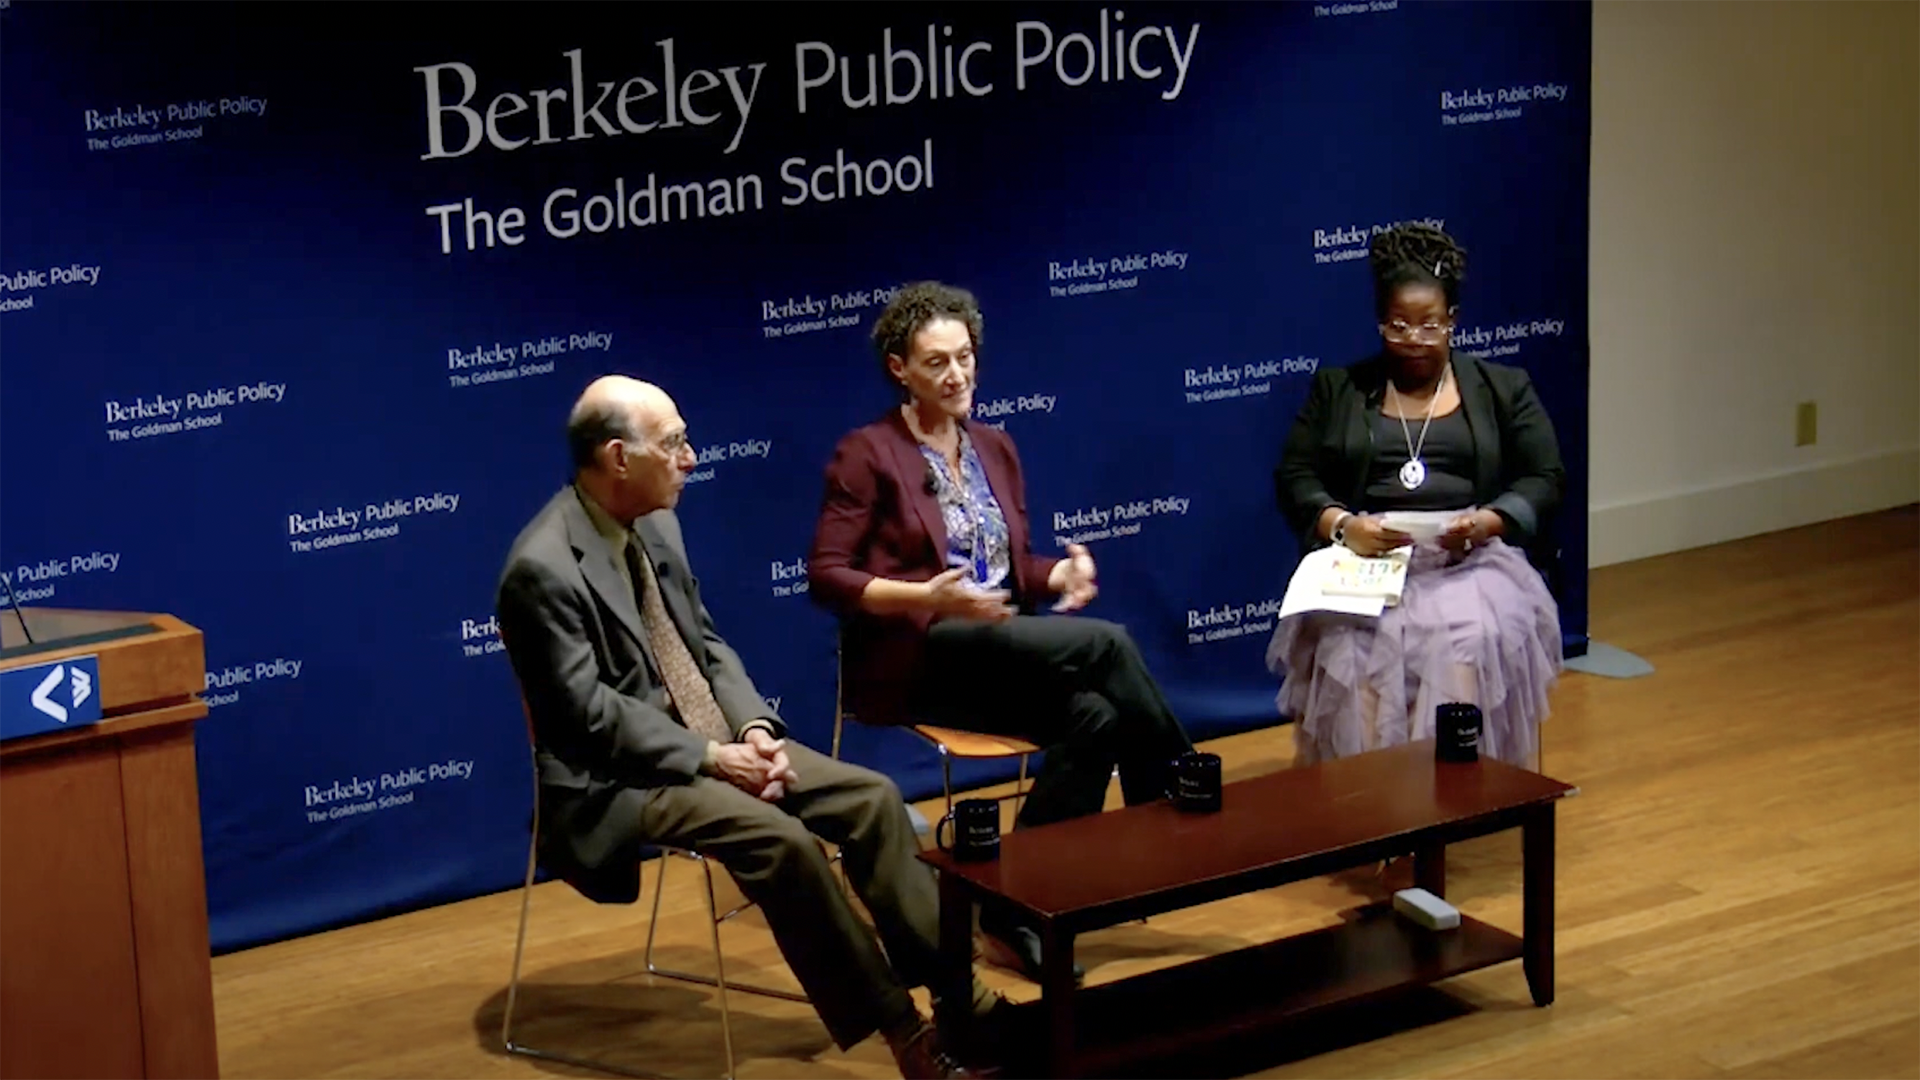 Richard Rothstein and his daughter, Leah Rothstein, and Tamika Moss, sit on stage while giving a talk for an audience